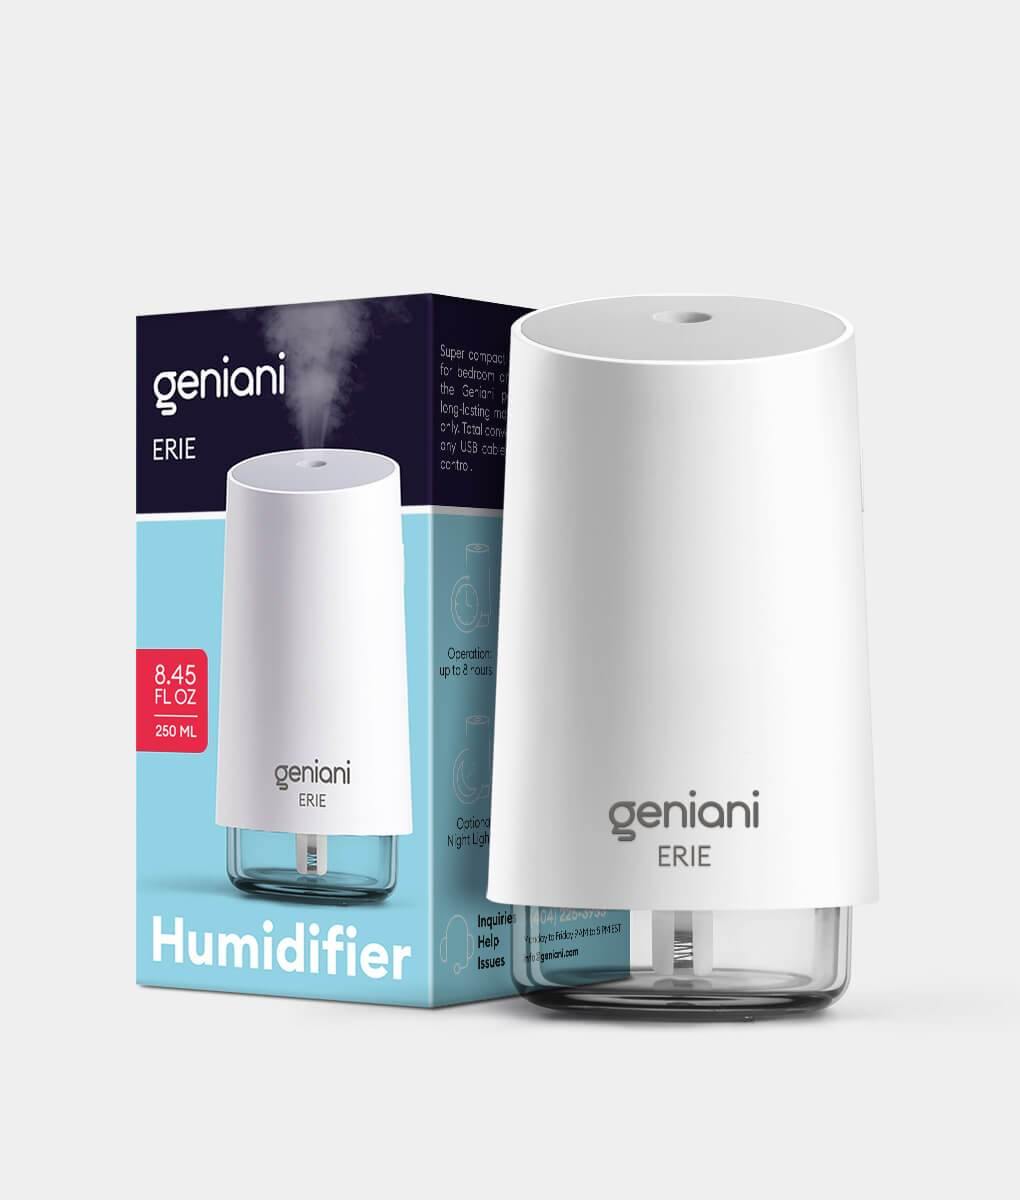 erie travel usb humidifier